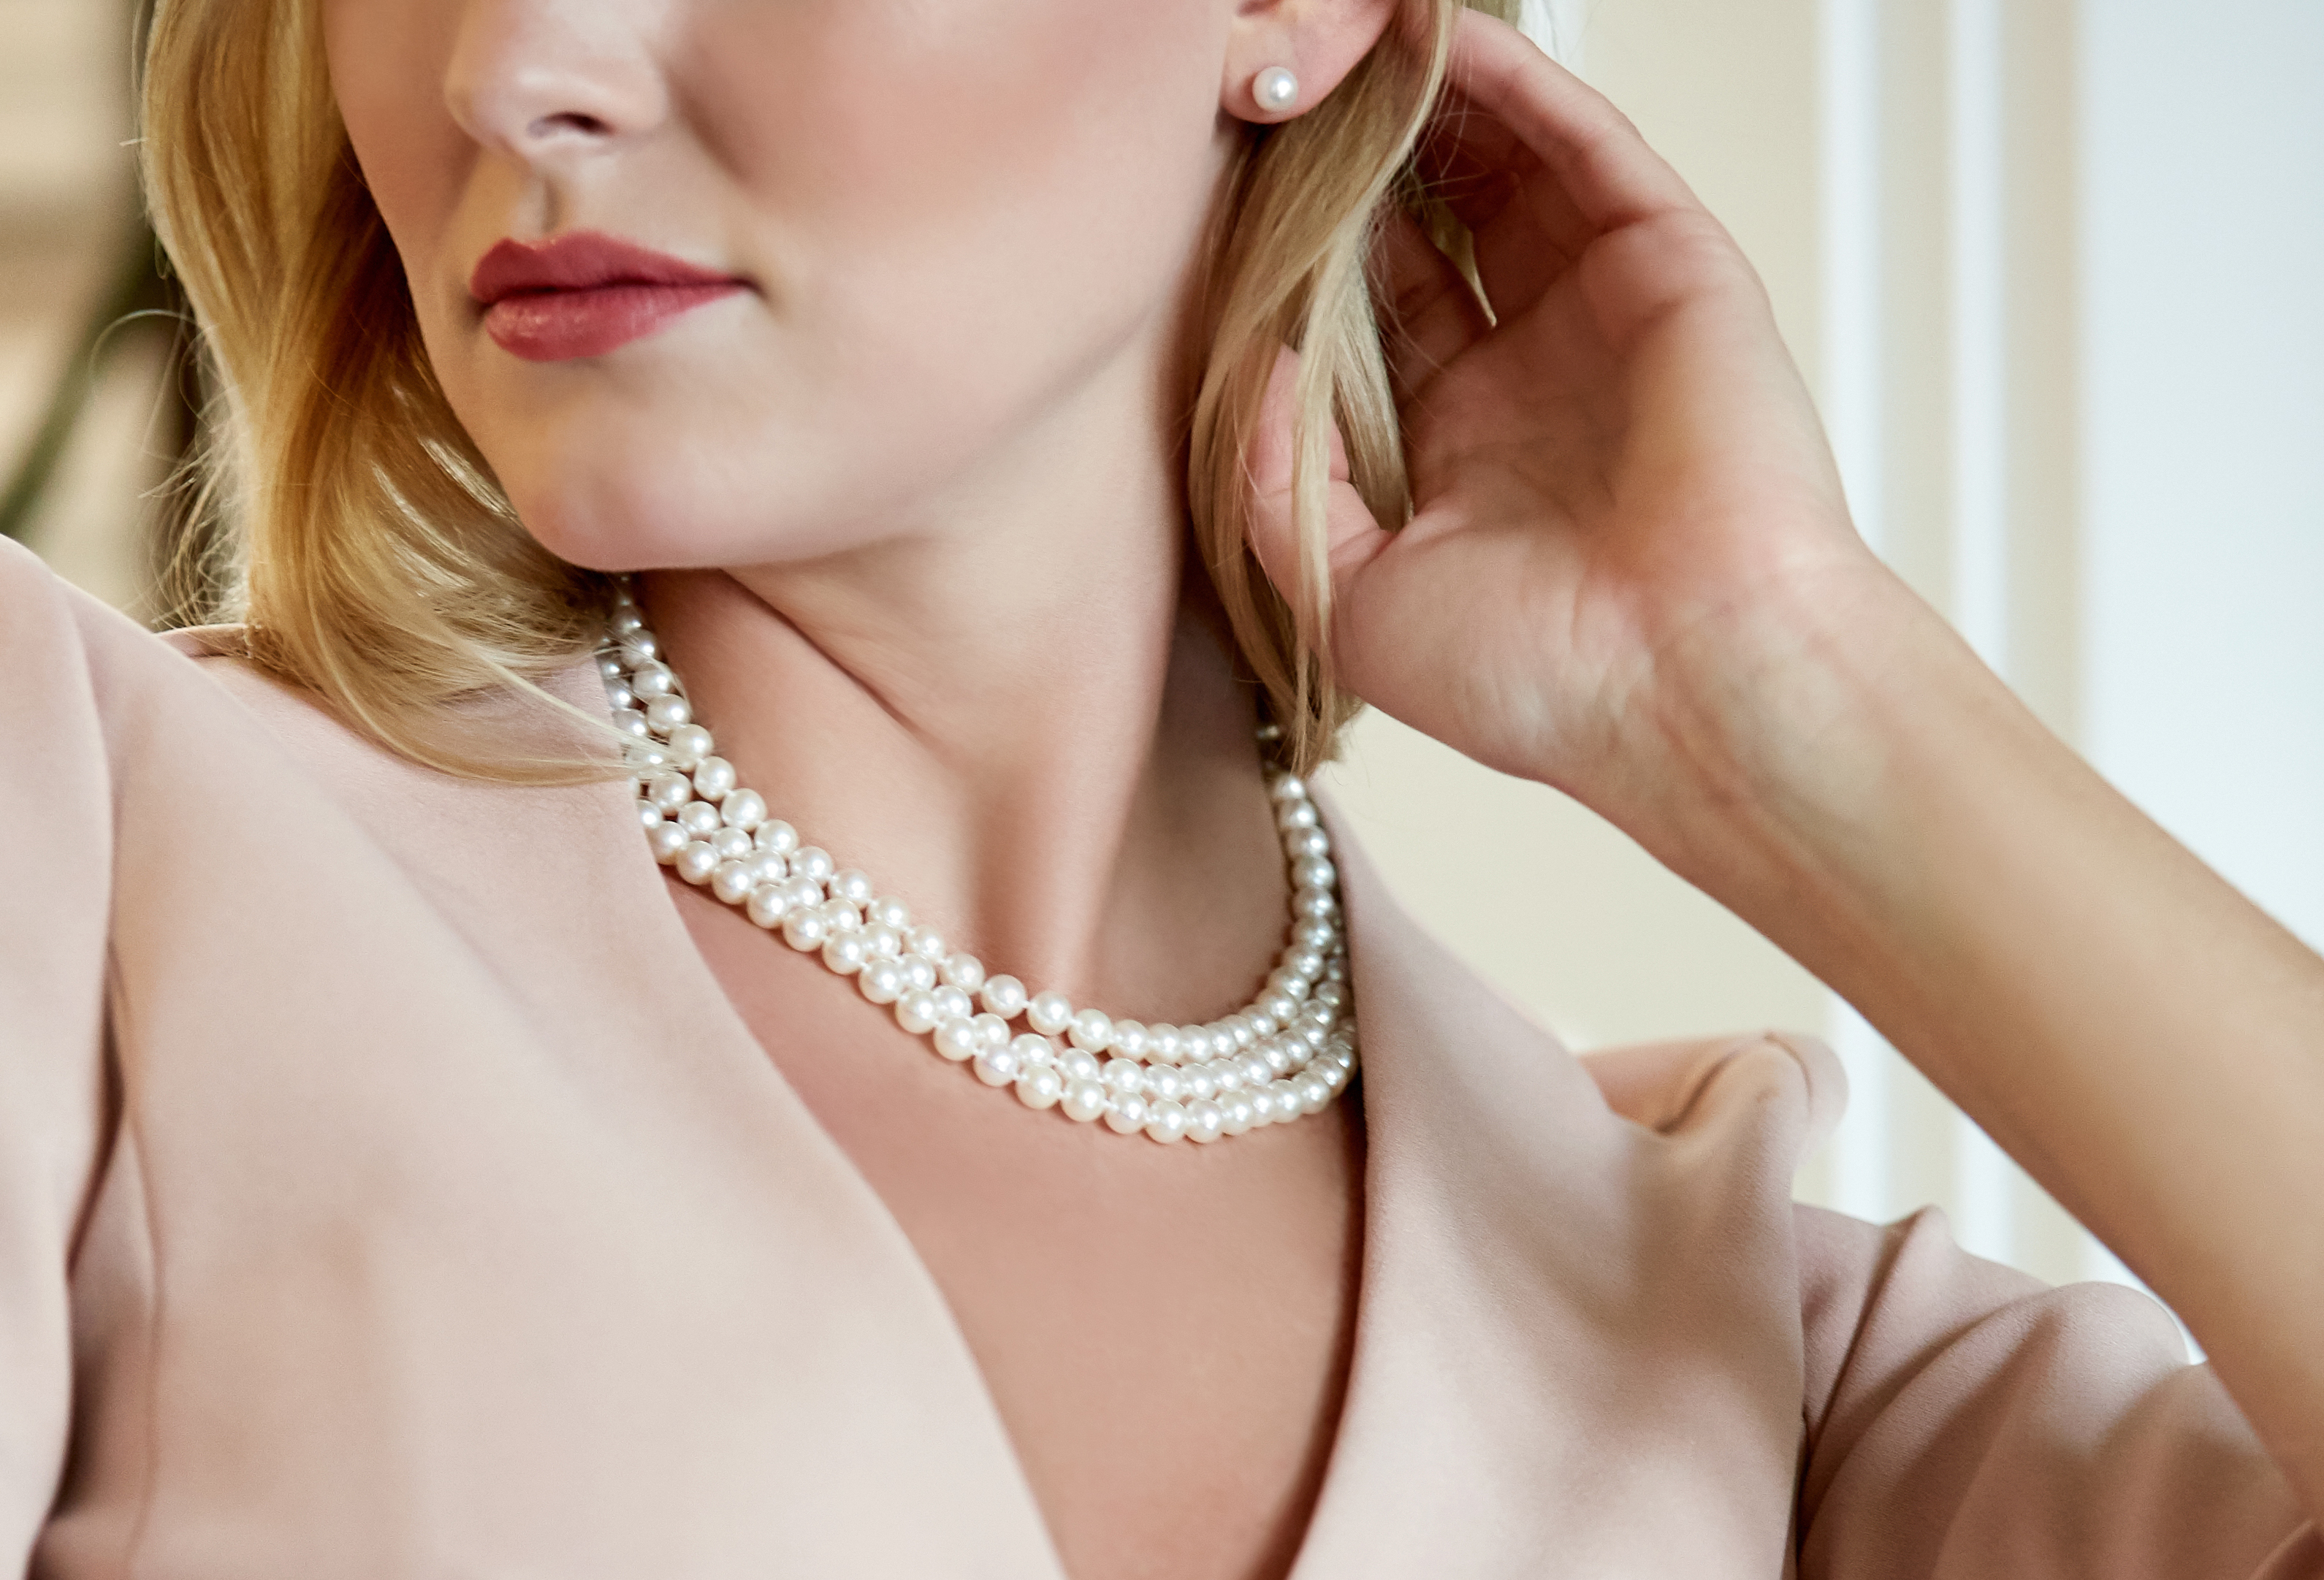 Styles of pearl necklaces